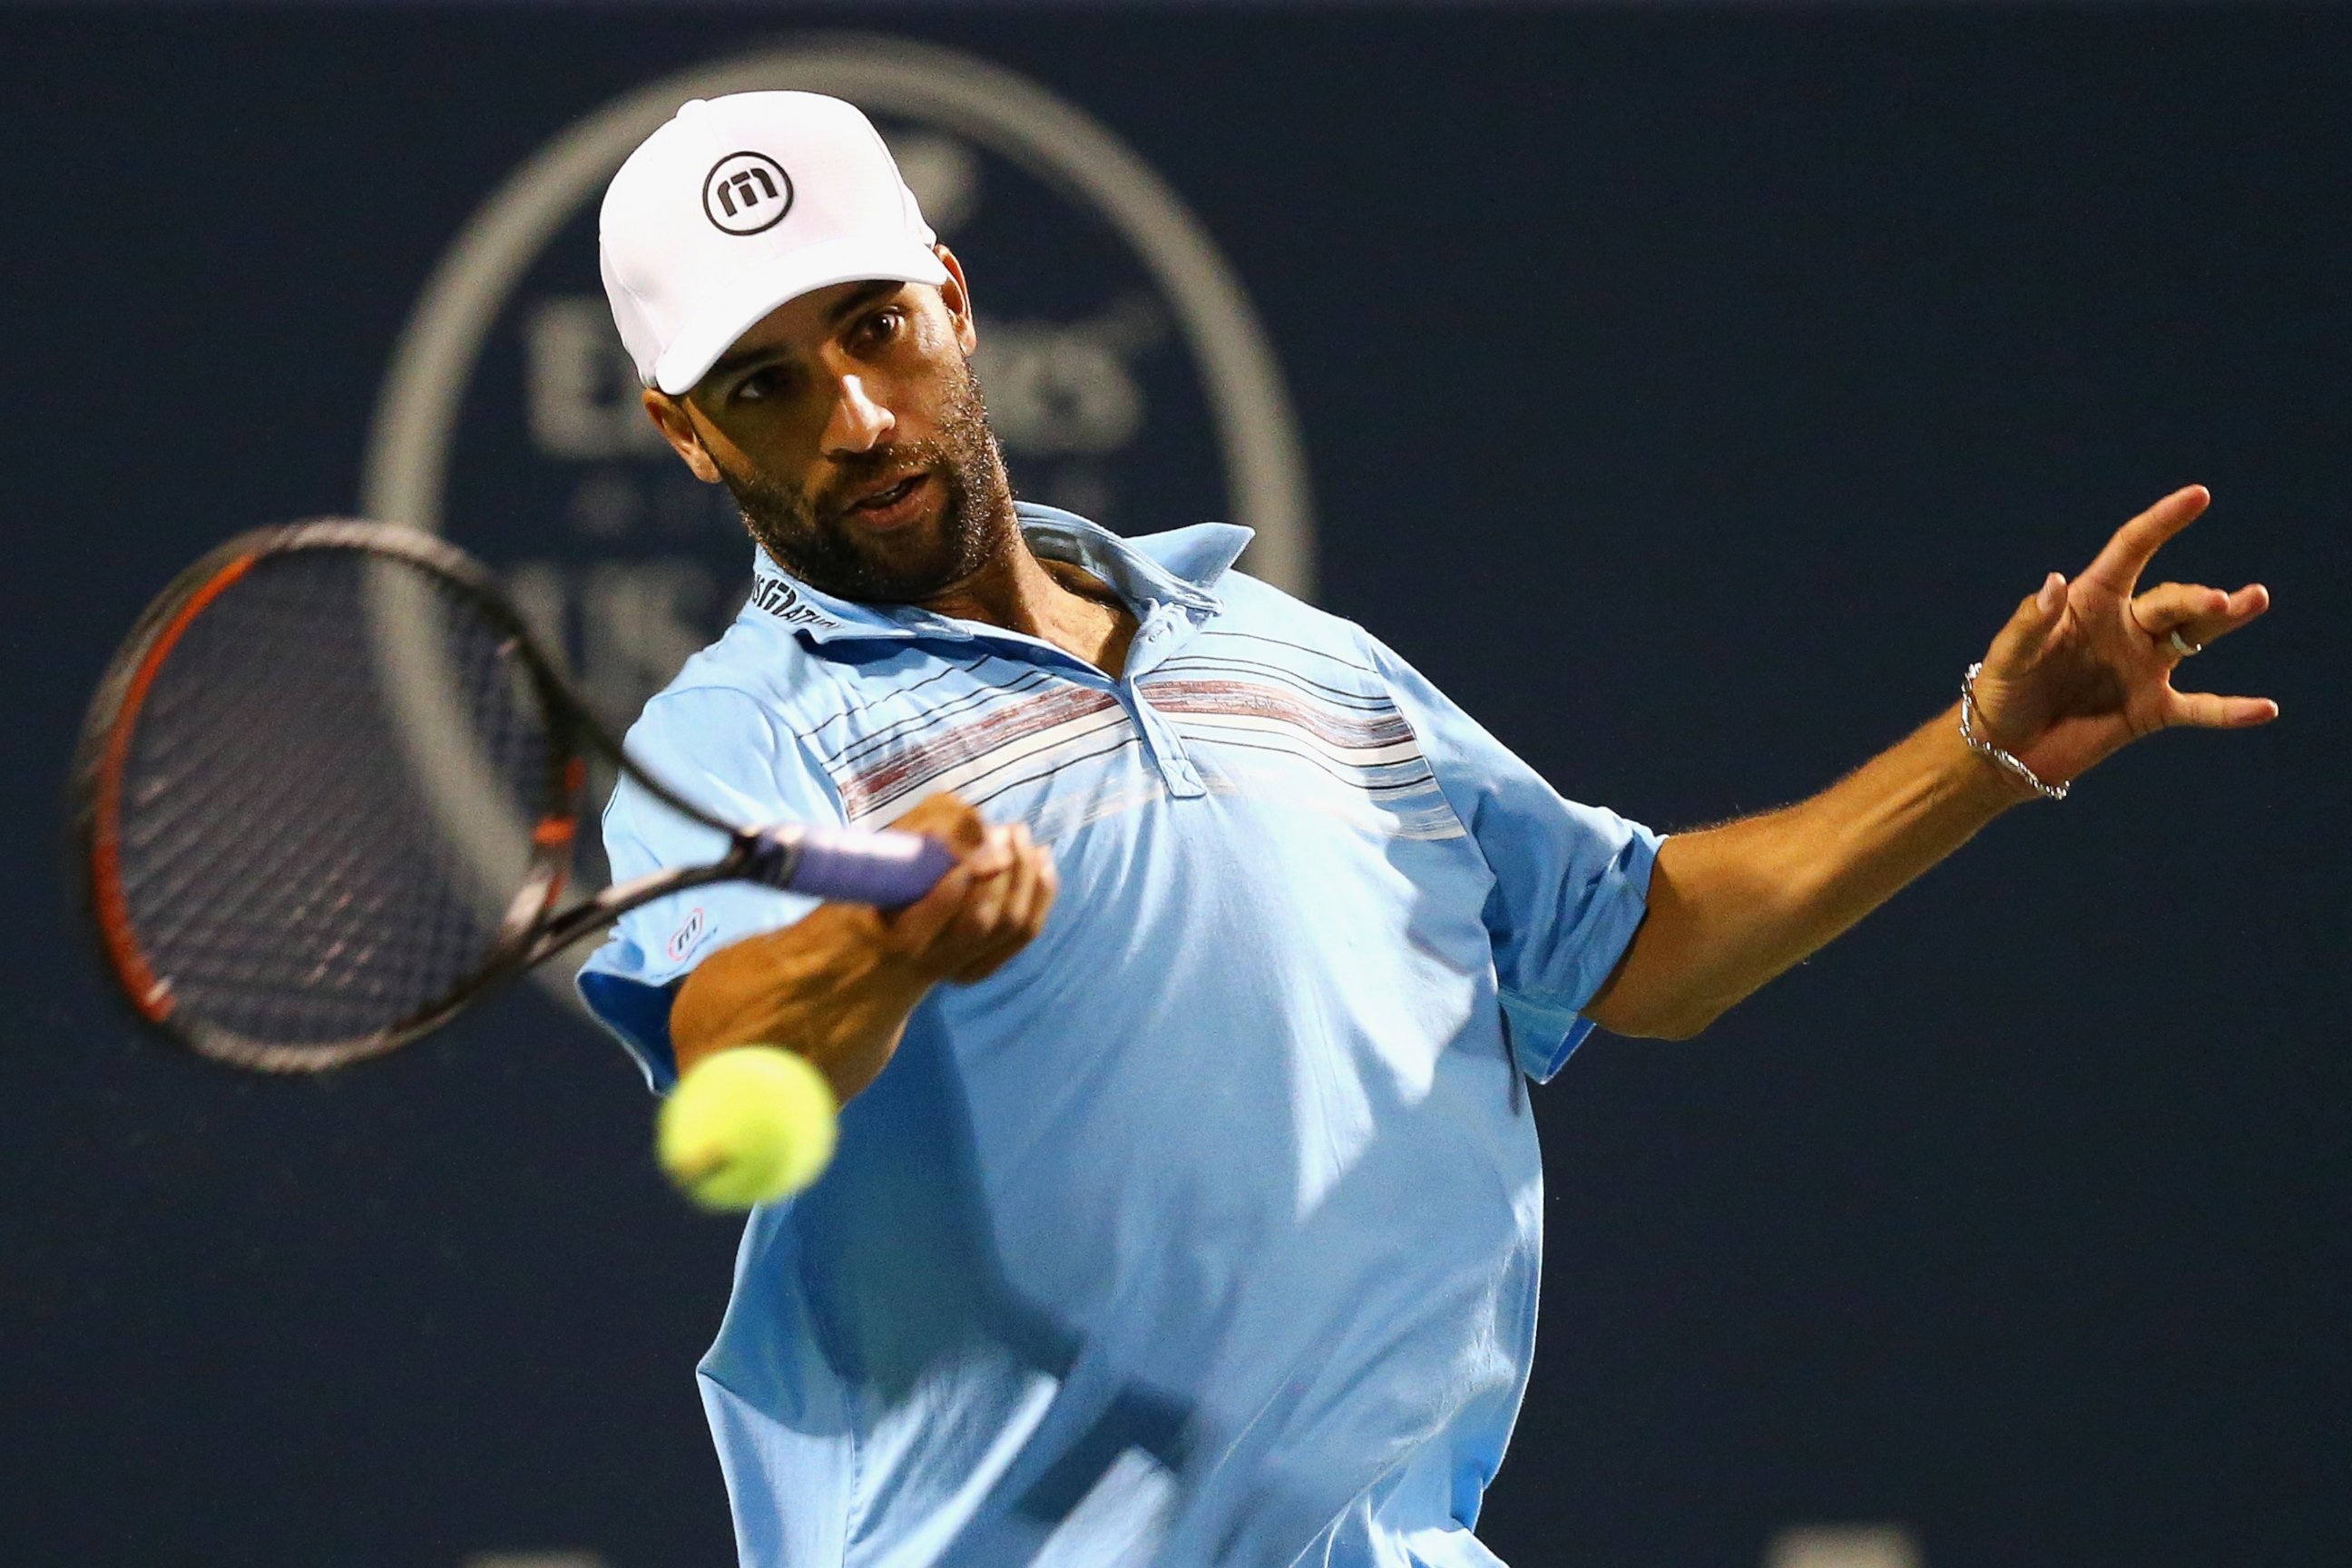 PHOTO: James Blake returns a forehand to Andy Roddick during their match as part of the Men's Legends presented by PowerShares Series on Day 4 of the Connecticut Open at Connecticut Tennis Center at Yale, Aug. 27, 2015 in New Haven, Conn.  